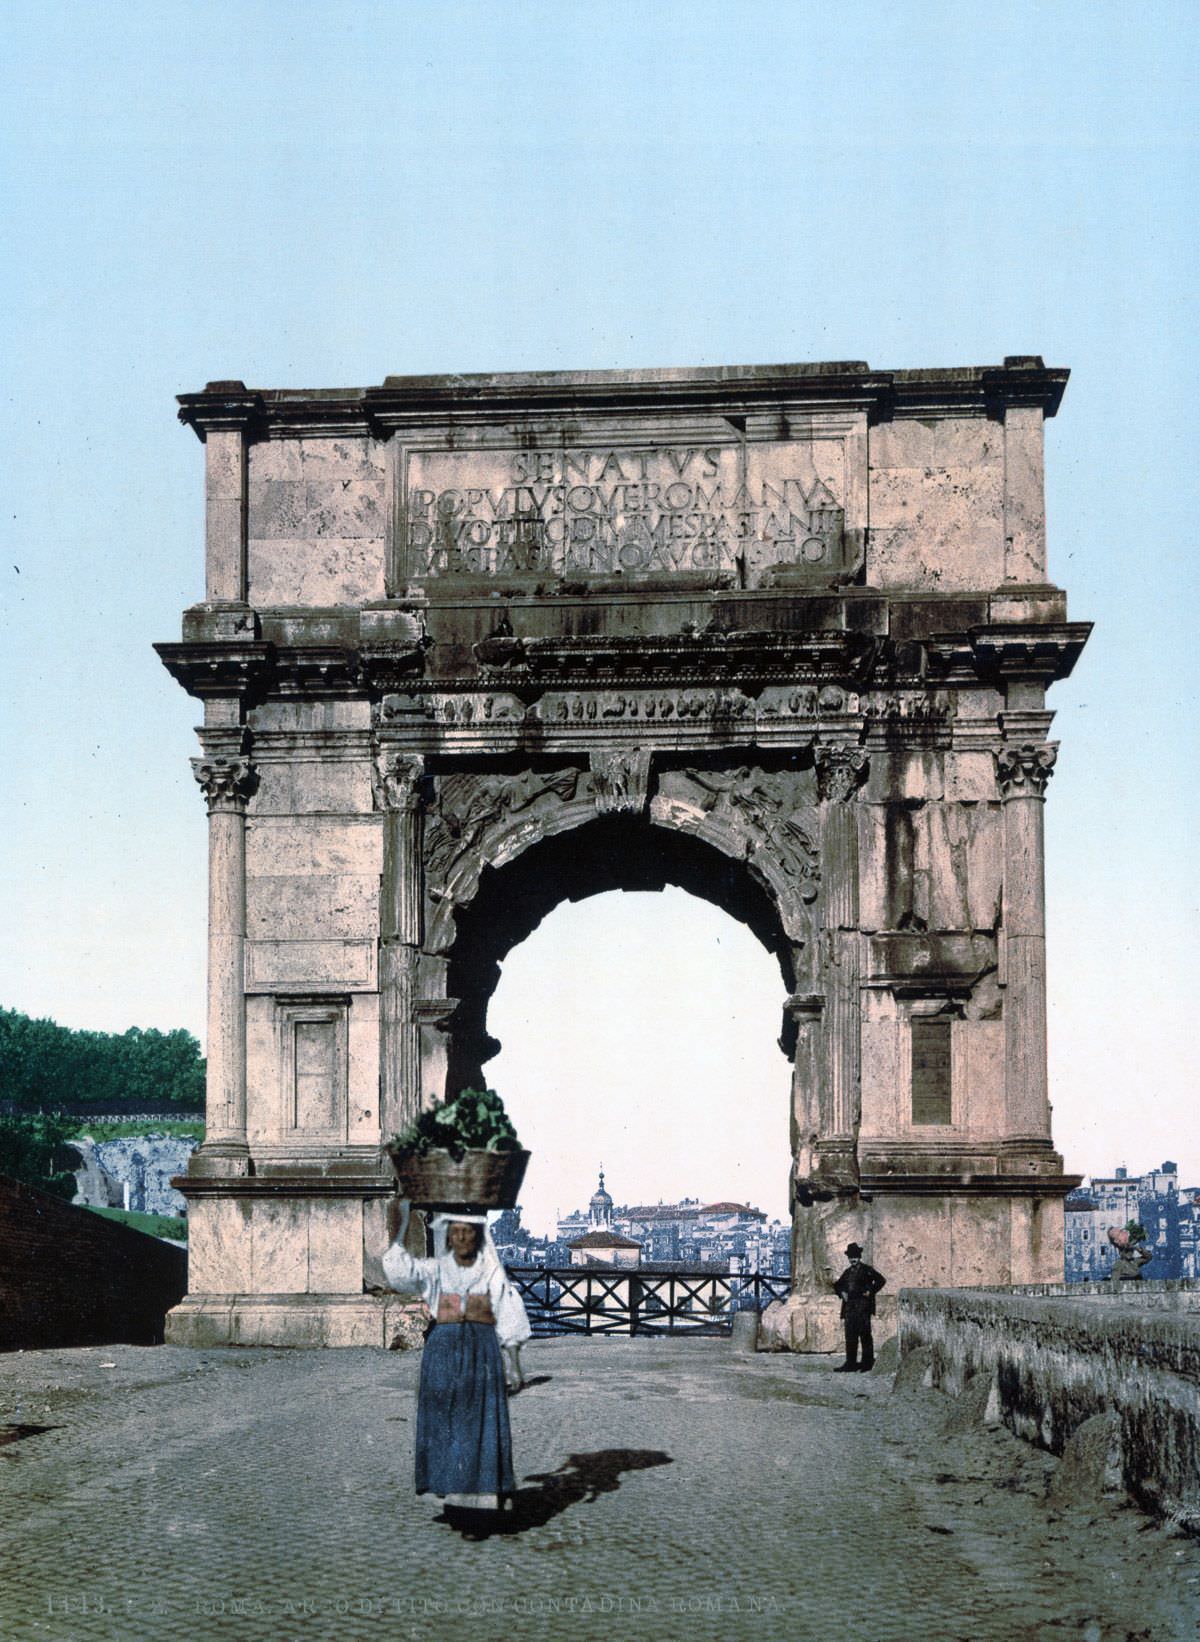 The Triumphal Arch of Titus.